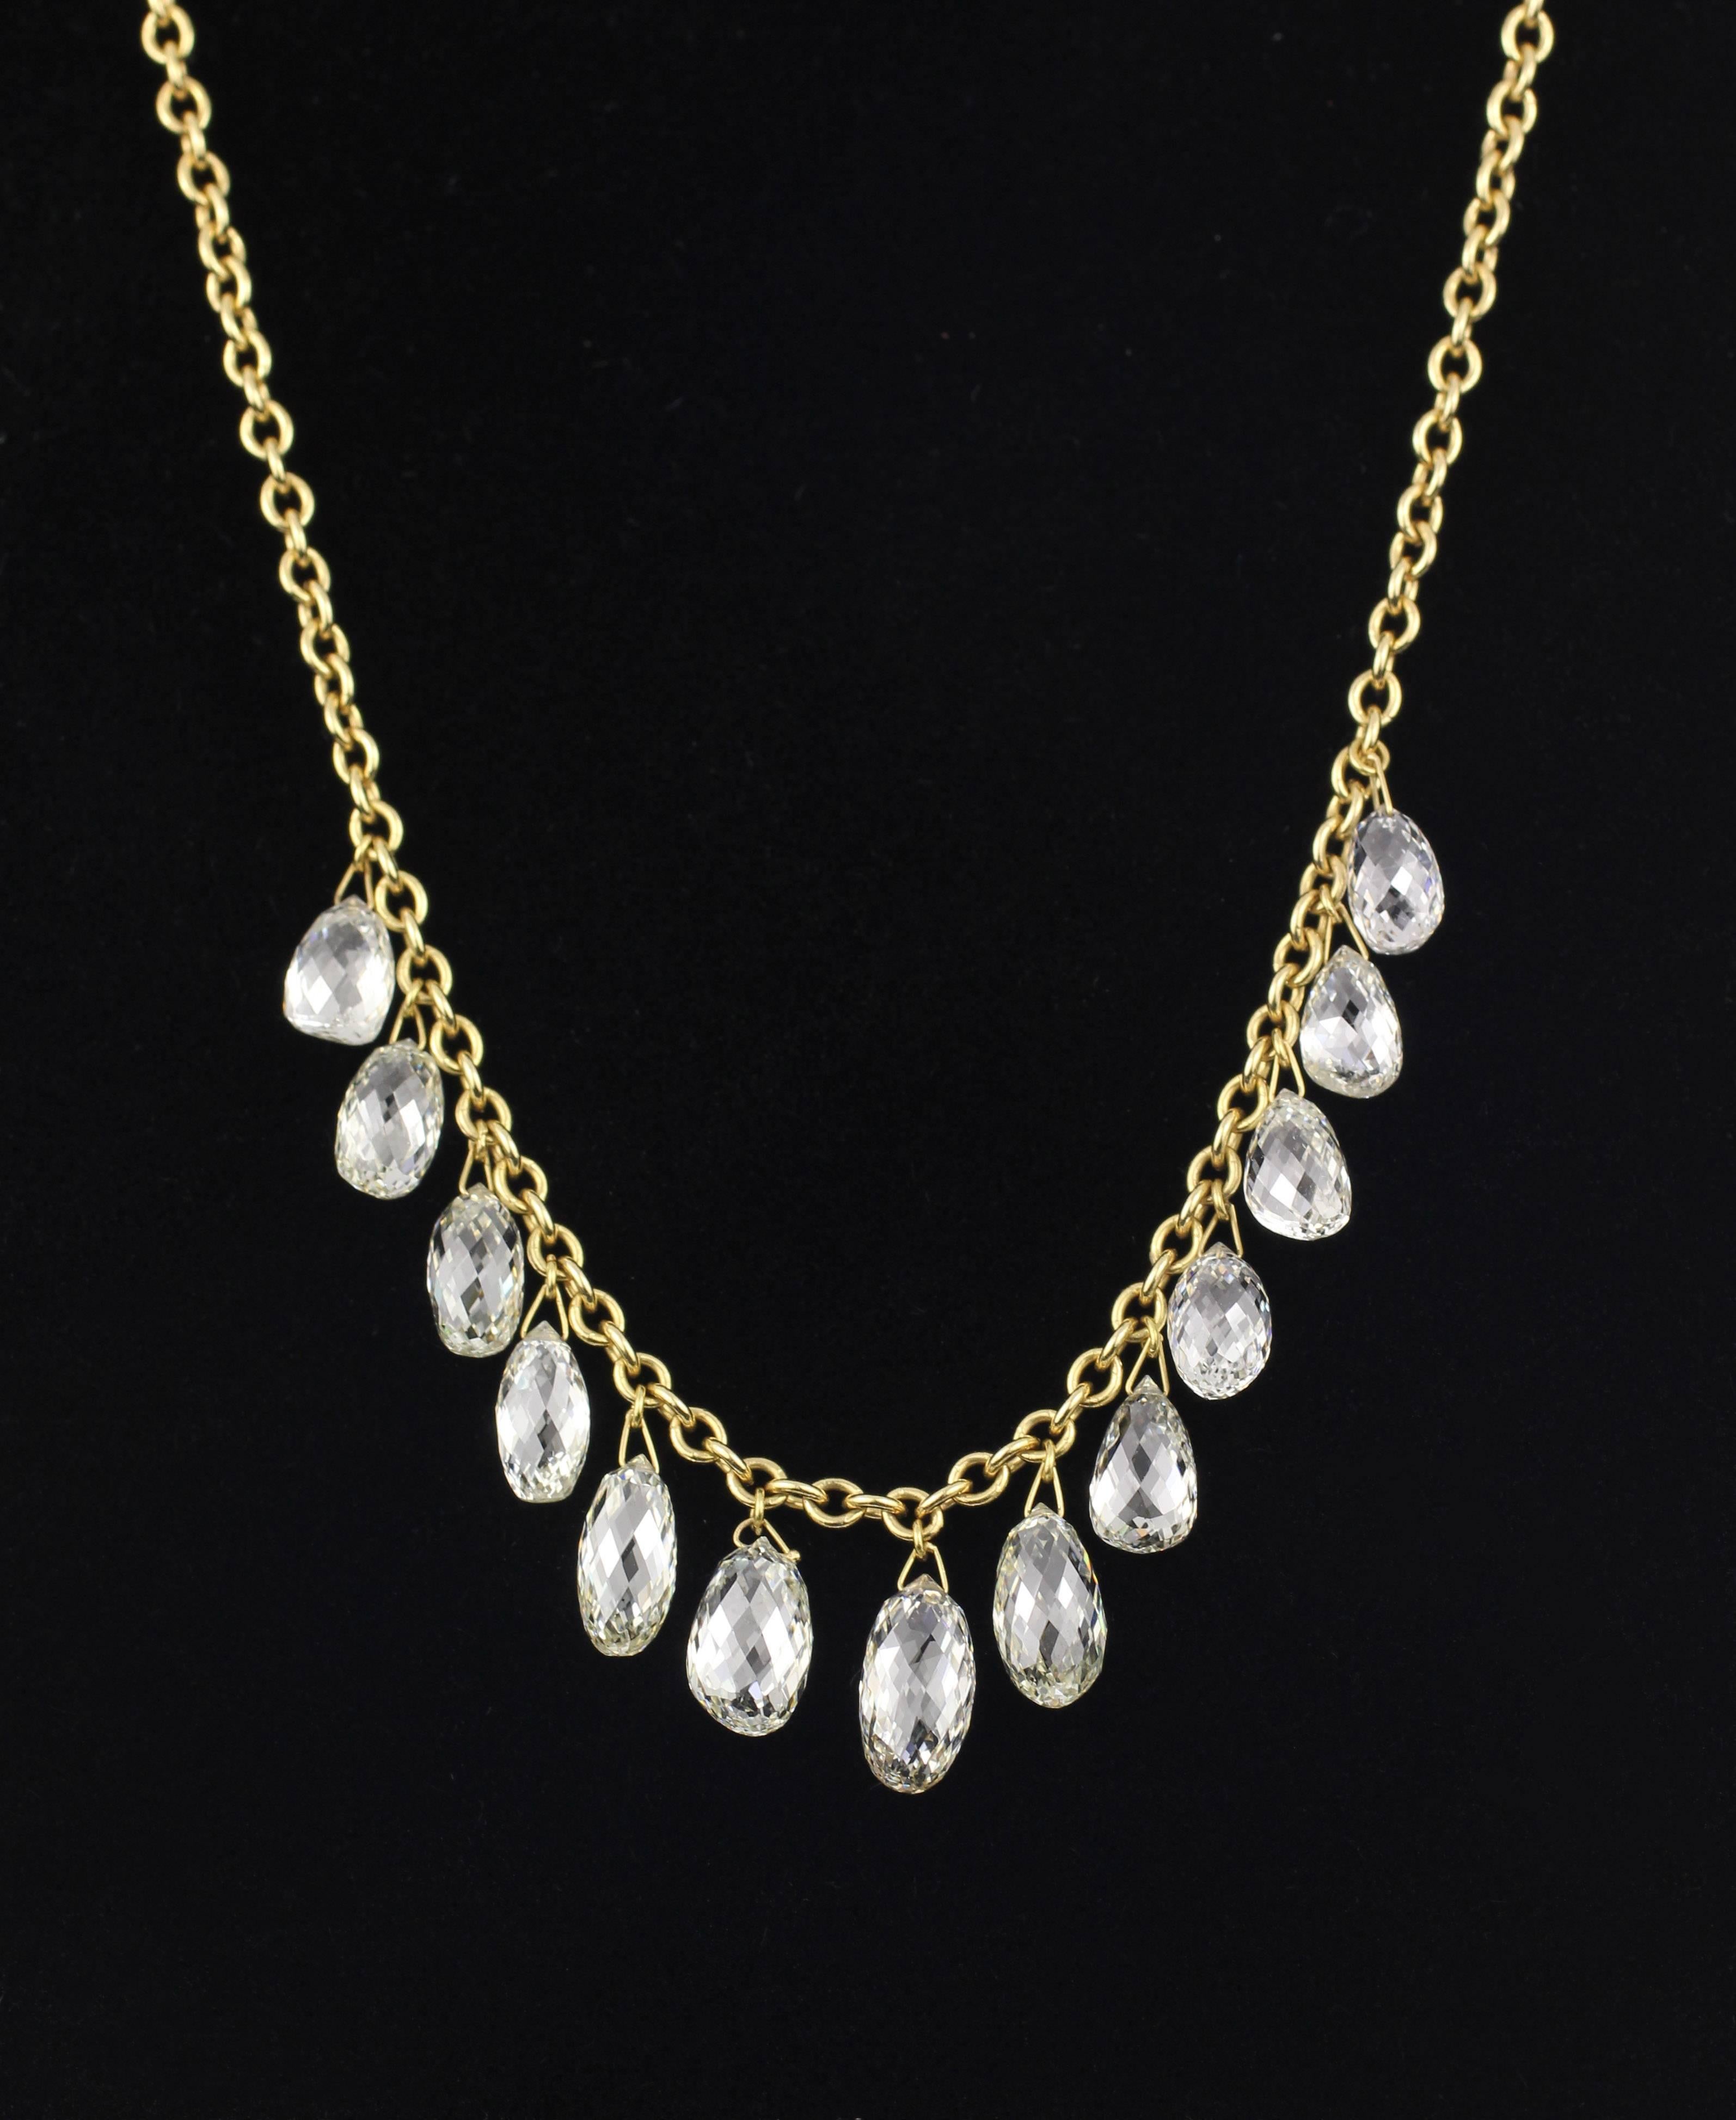 This beautiful and unique 18KT Gold and briolette Diamond Necklace contains 12 briolette diamonds equalling 14.26 Cts. Attached to an 18KT gold link chain that measures 18 1/4 inches in length.

Designed and made in house by Julius Cohen New York.